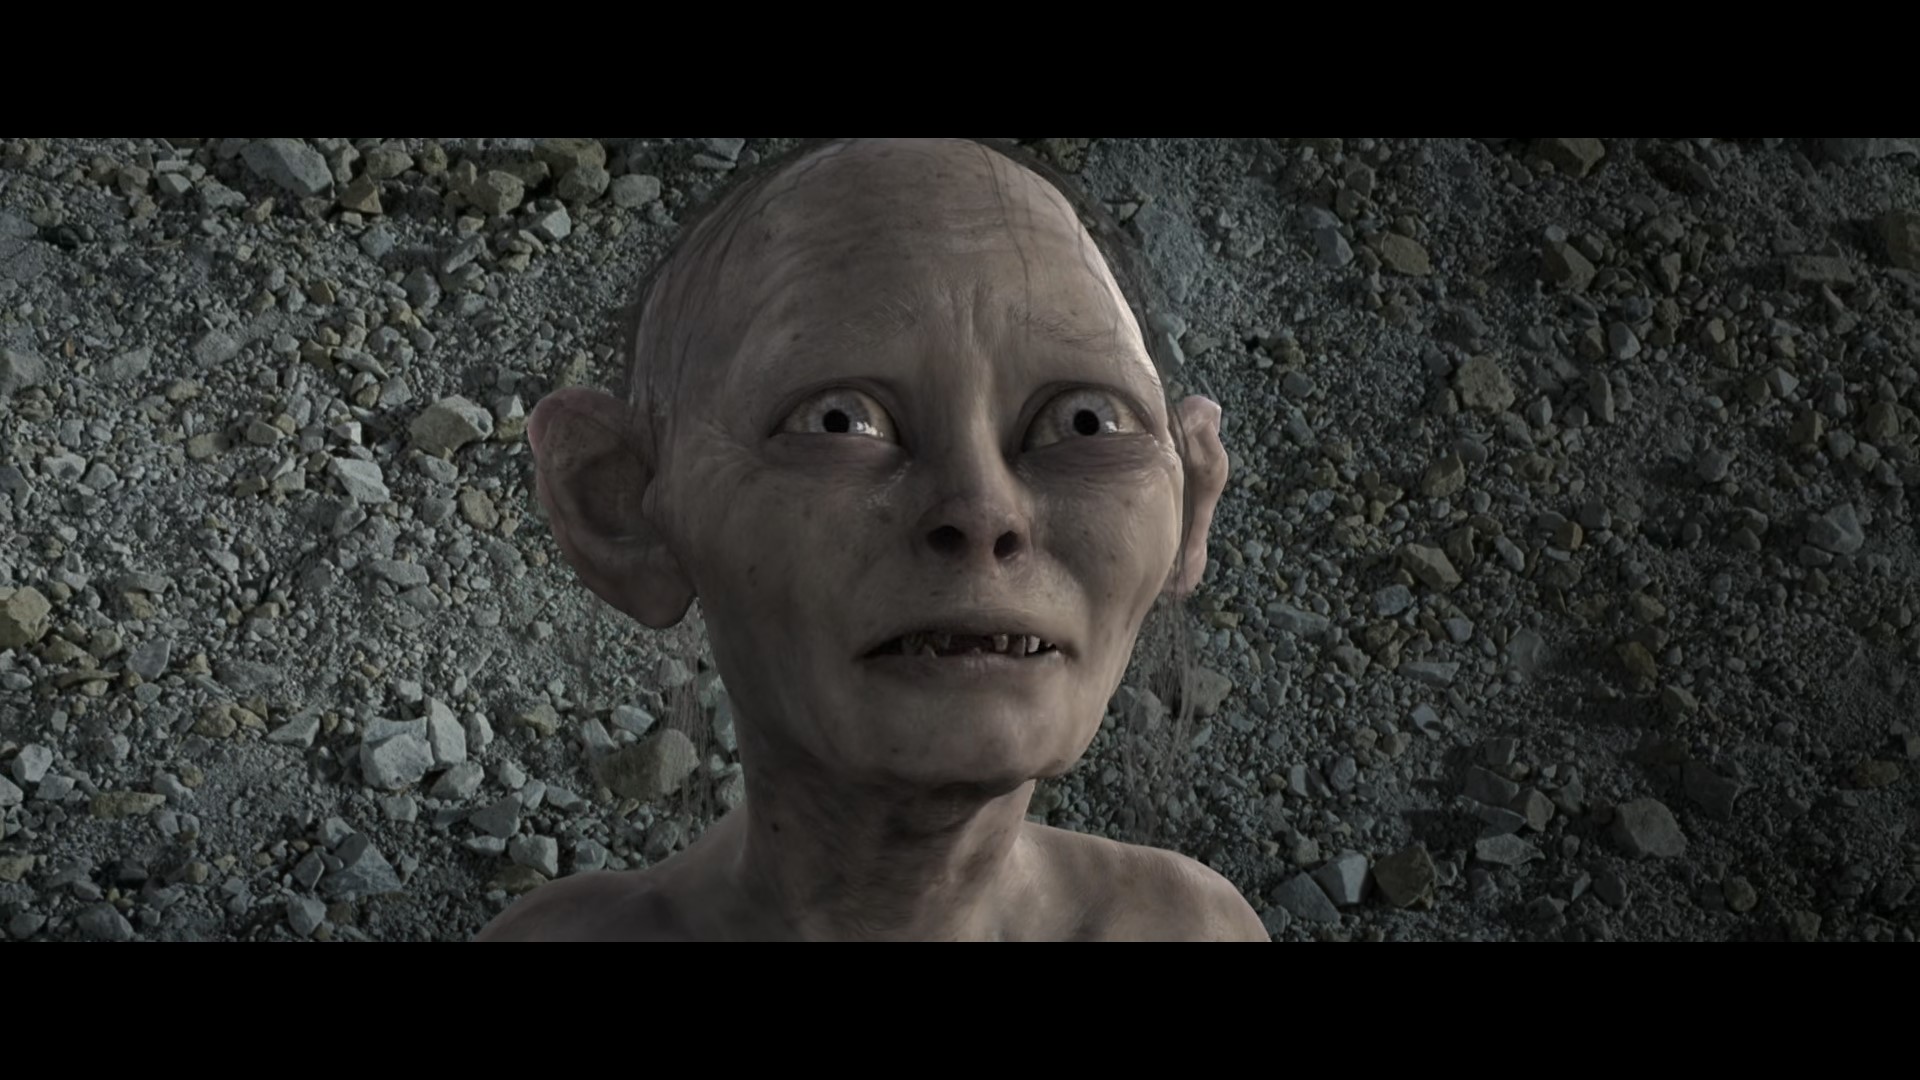 Smeagol (Source - The Two Towers from the movie The Lord of the Rings)